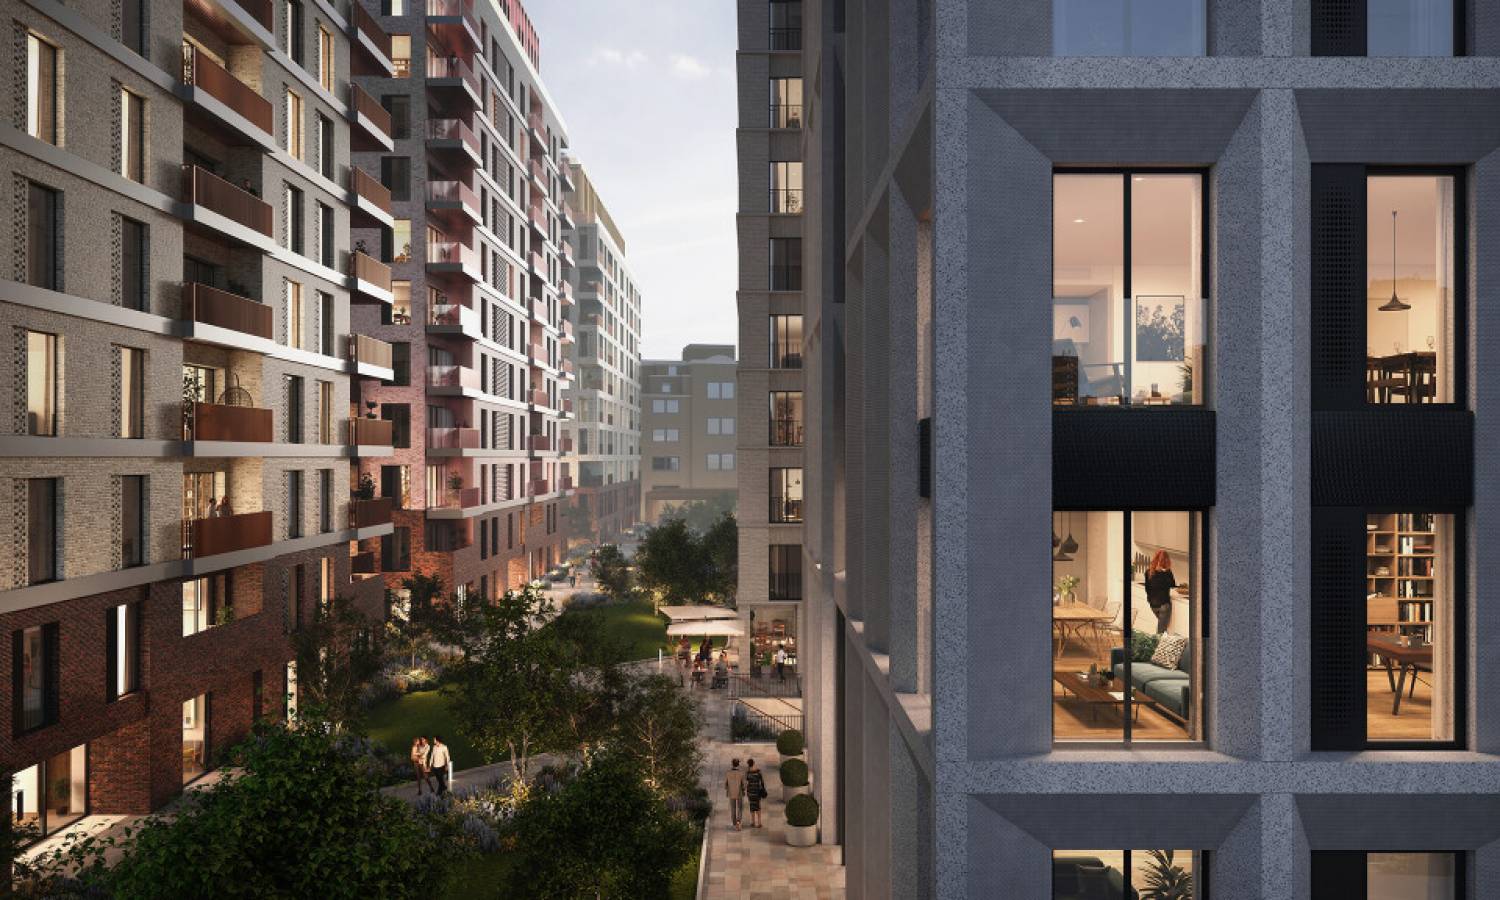 MARK and SevenCapital purchase a £500m residential scheme in Kensington